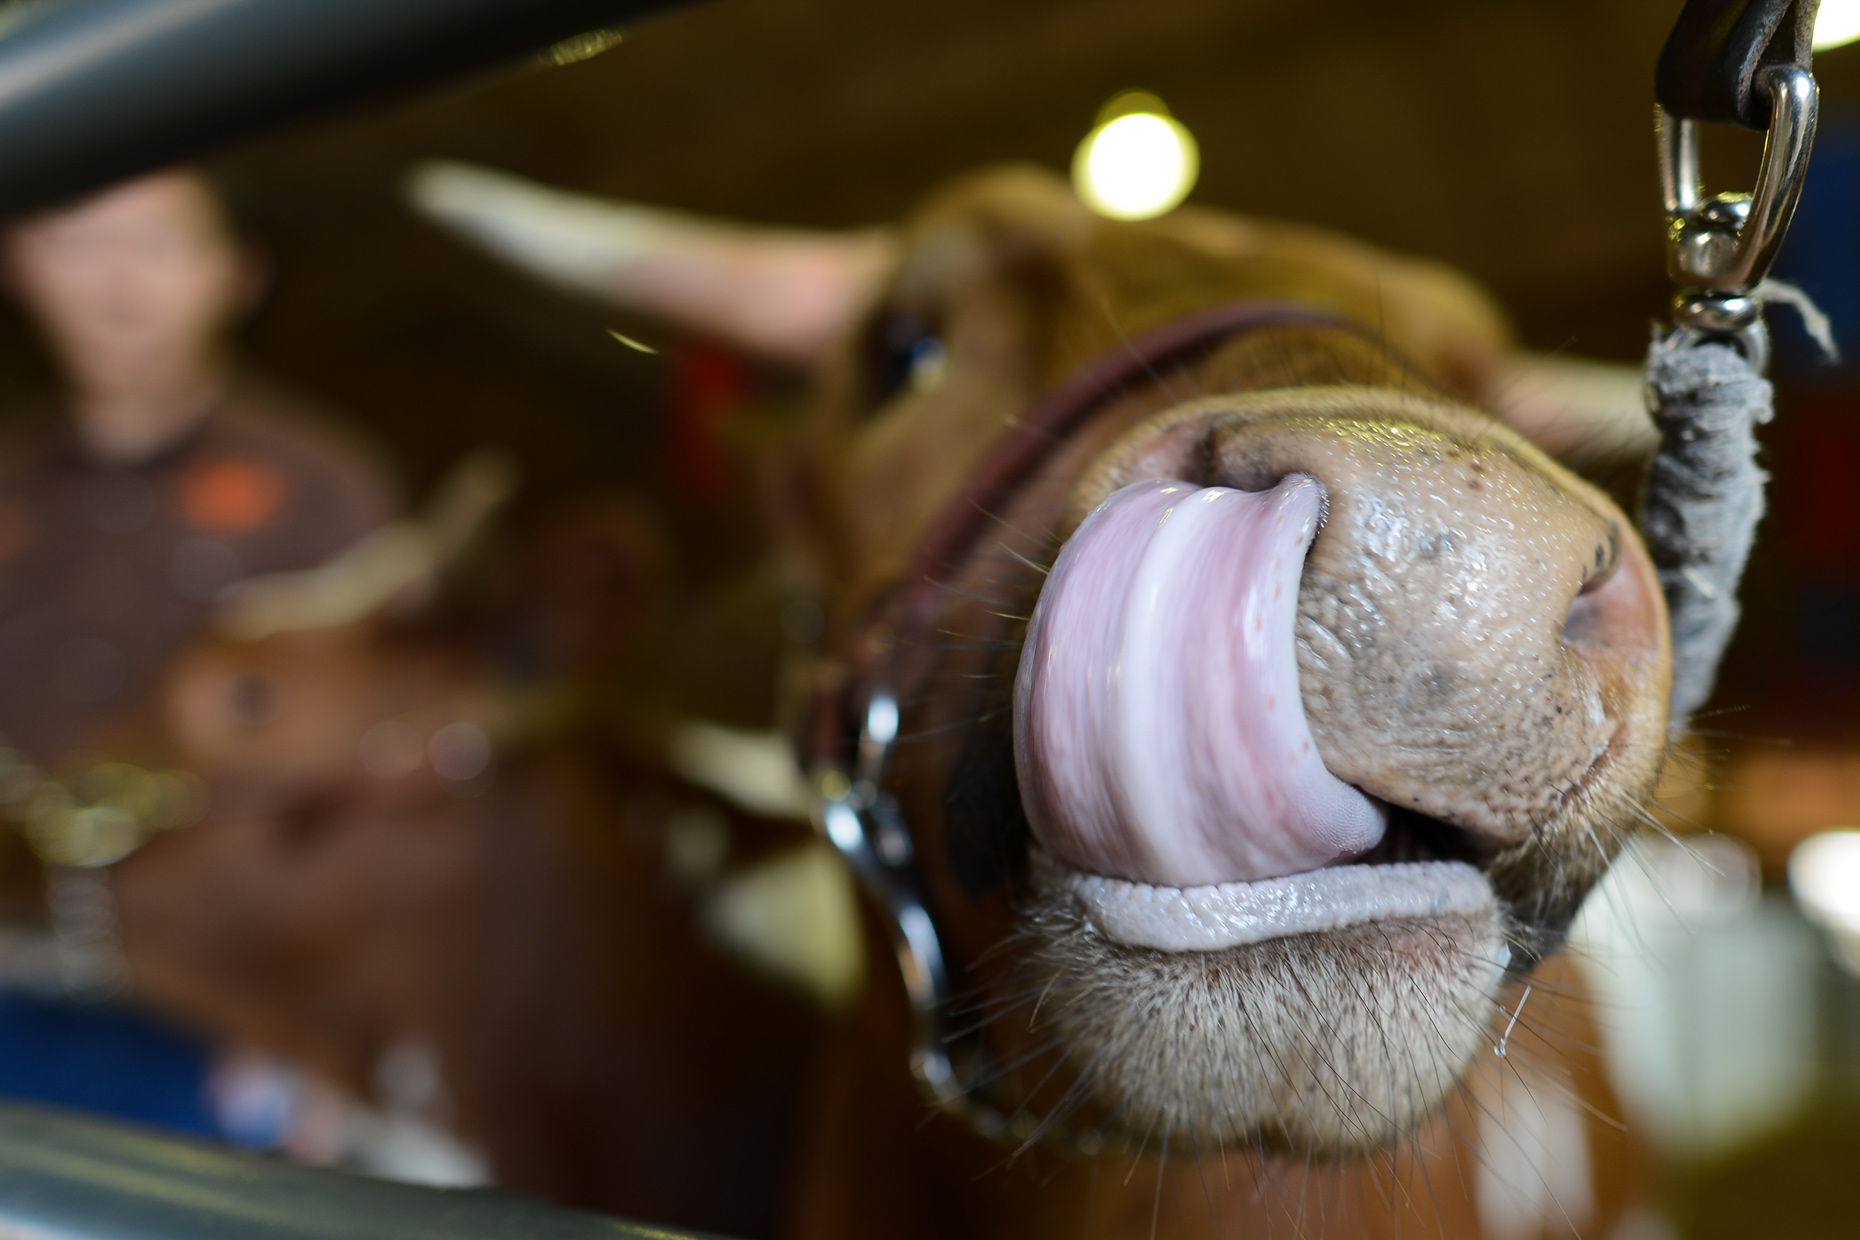 Cow at The State Fair of Texas. Photography by Kevin Brown